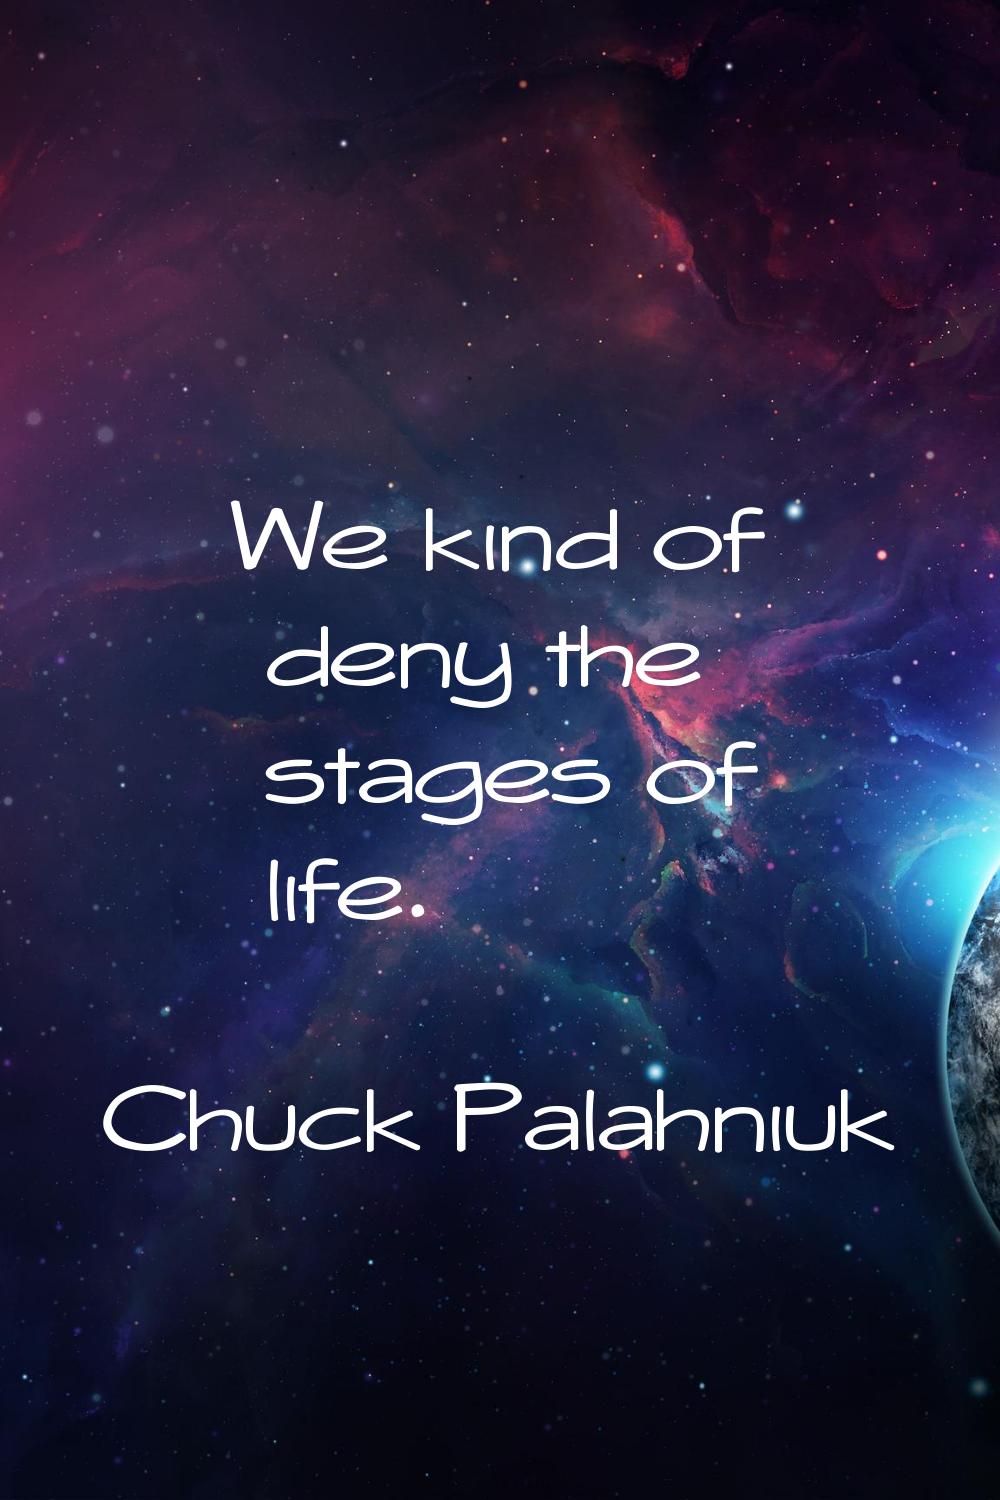 We kind of deny the stages of life.